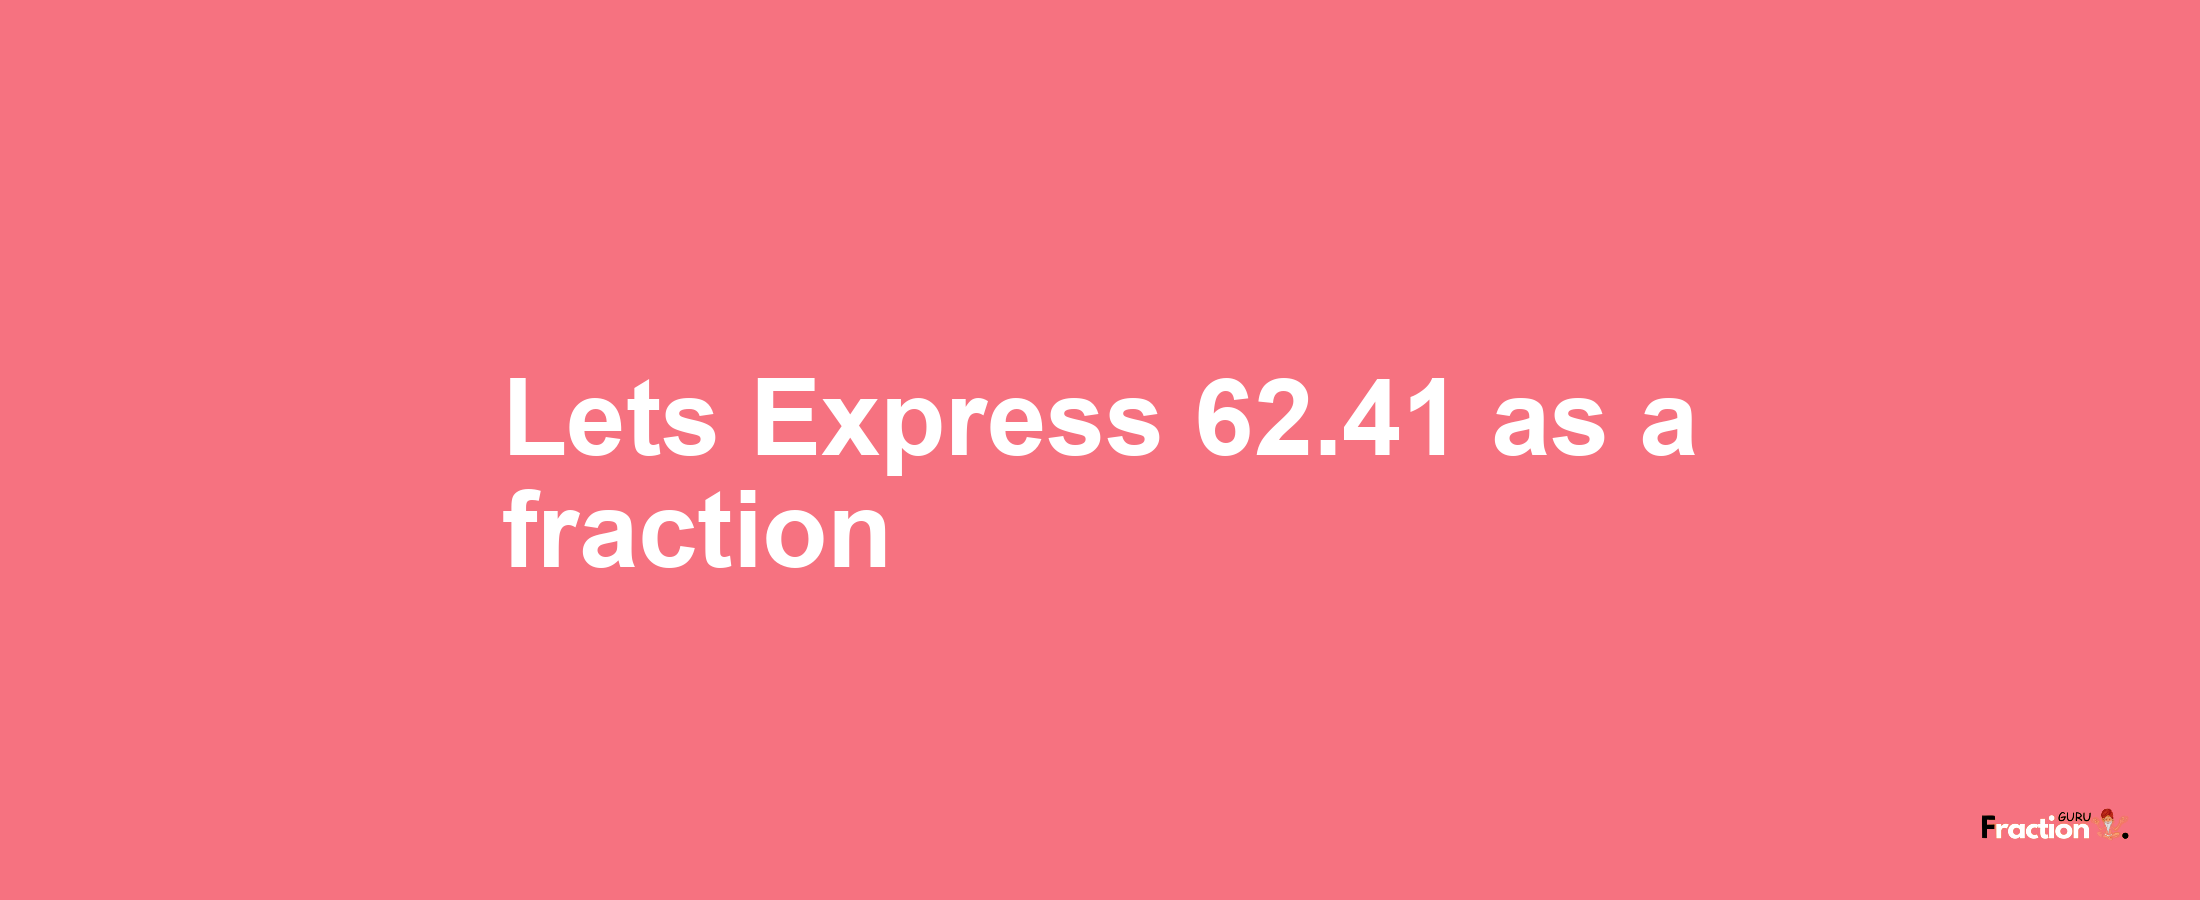 Lets Express 62.41 as afraction